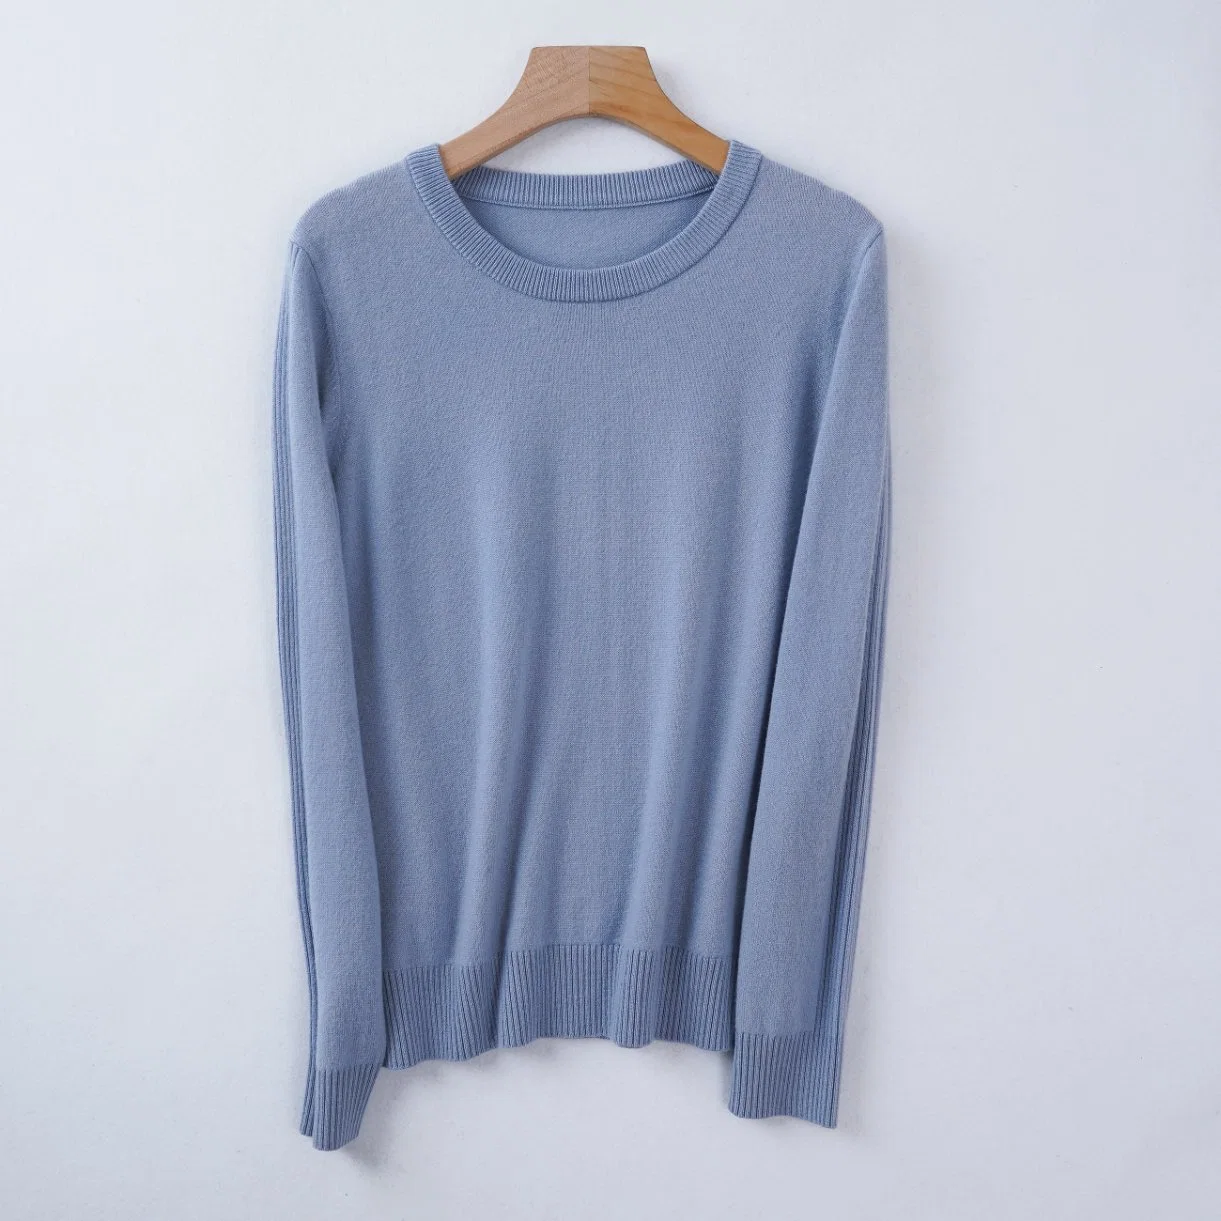 New Arrival Women Classic Fashion Round Neck Wool Cashmere Pullover Sweater